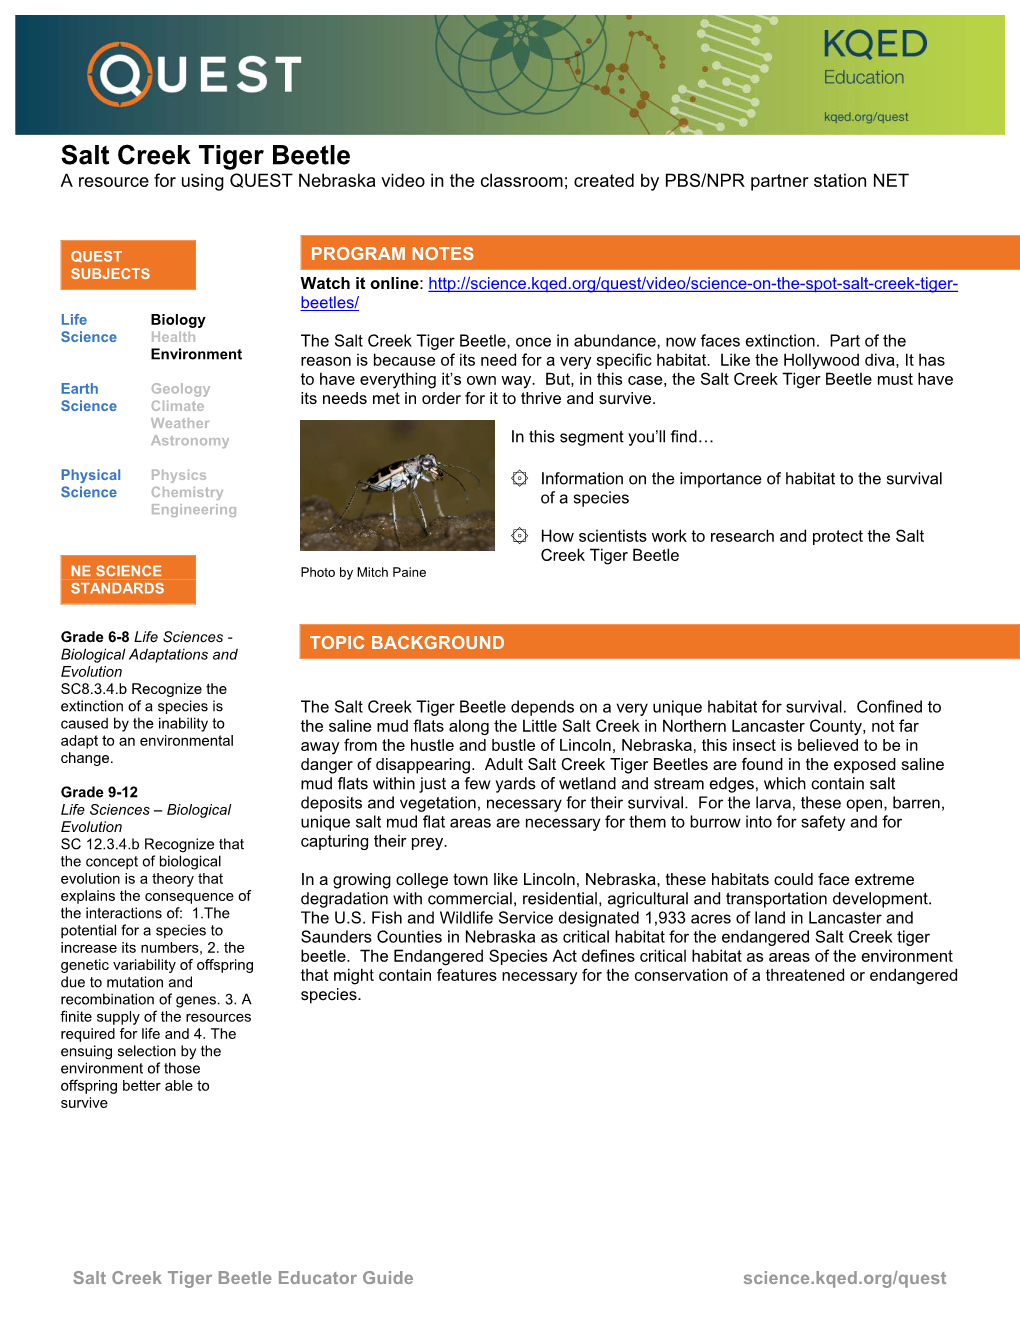 Salt Creek Tiger Beetle a Resource for Using QUEST Nebraska Video in the Classroom; Created by PBS/NPR Partner Station NET